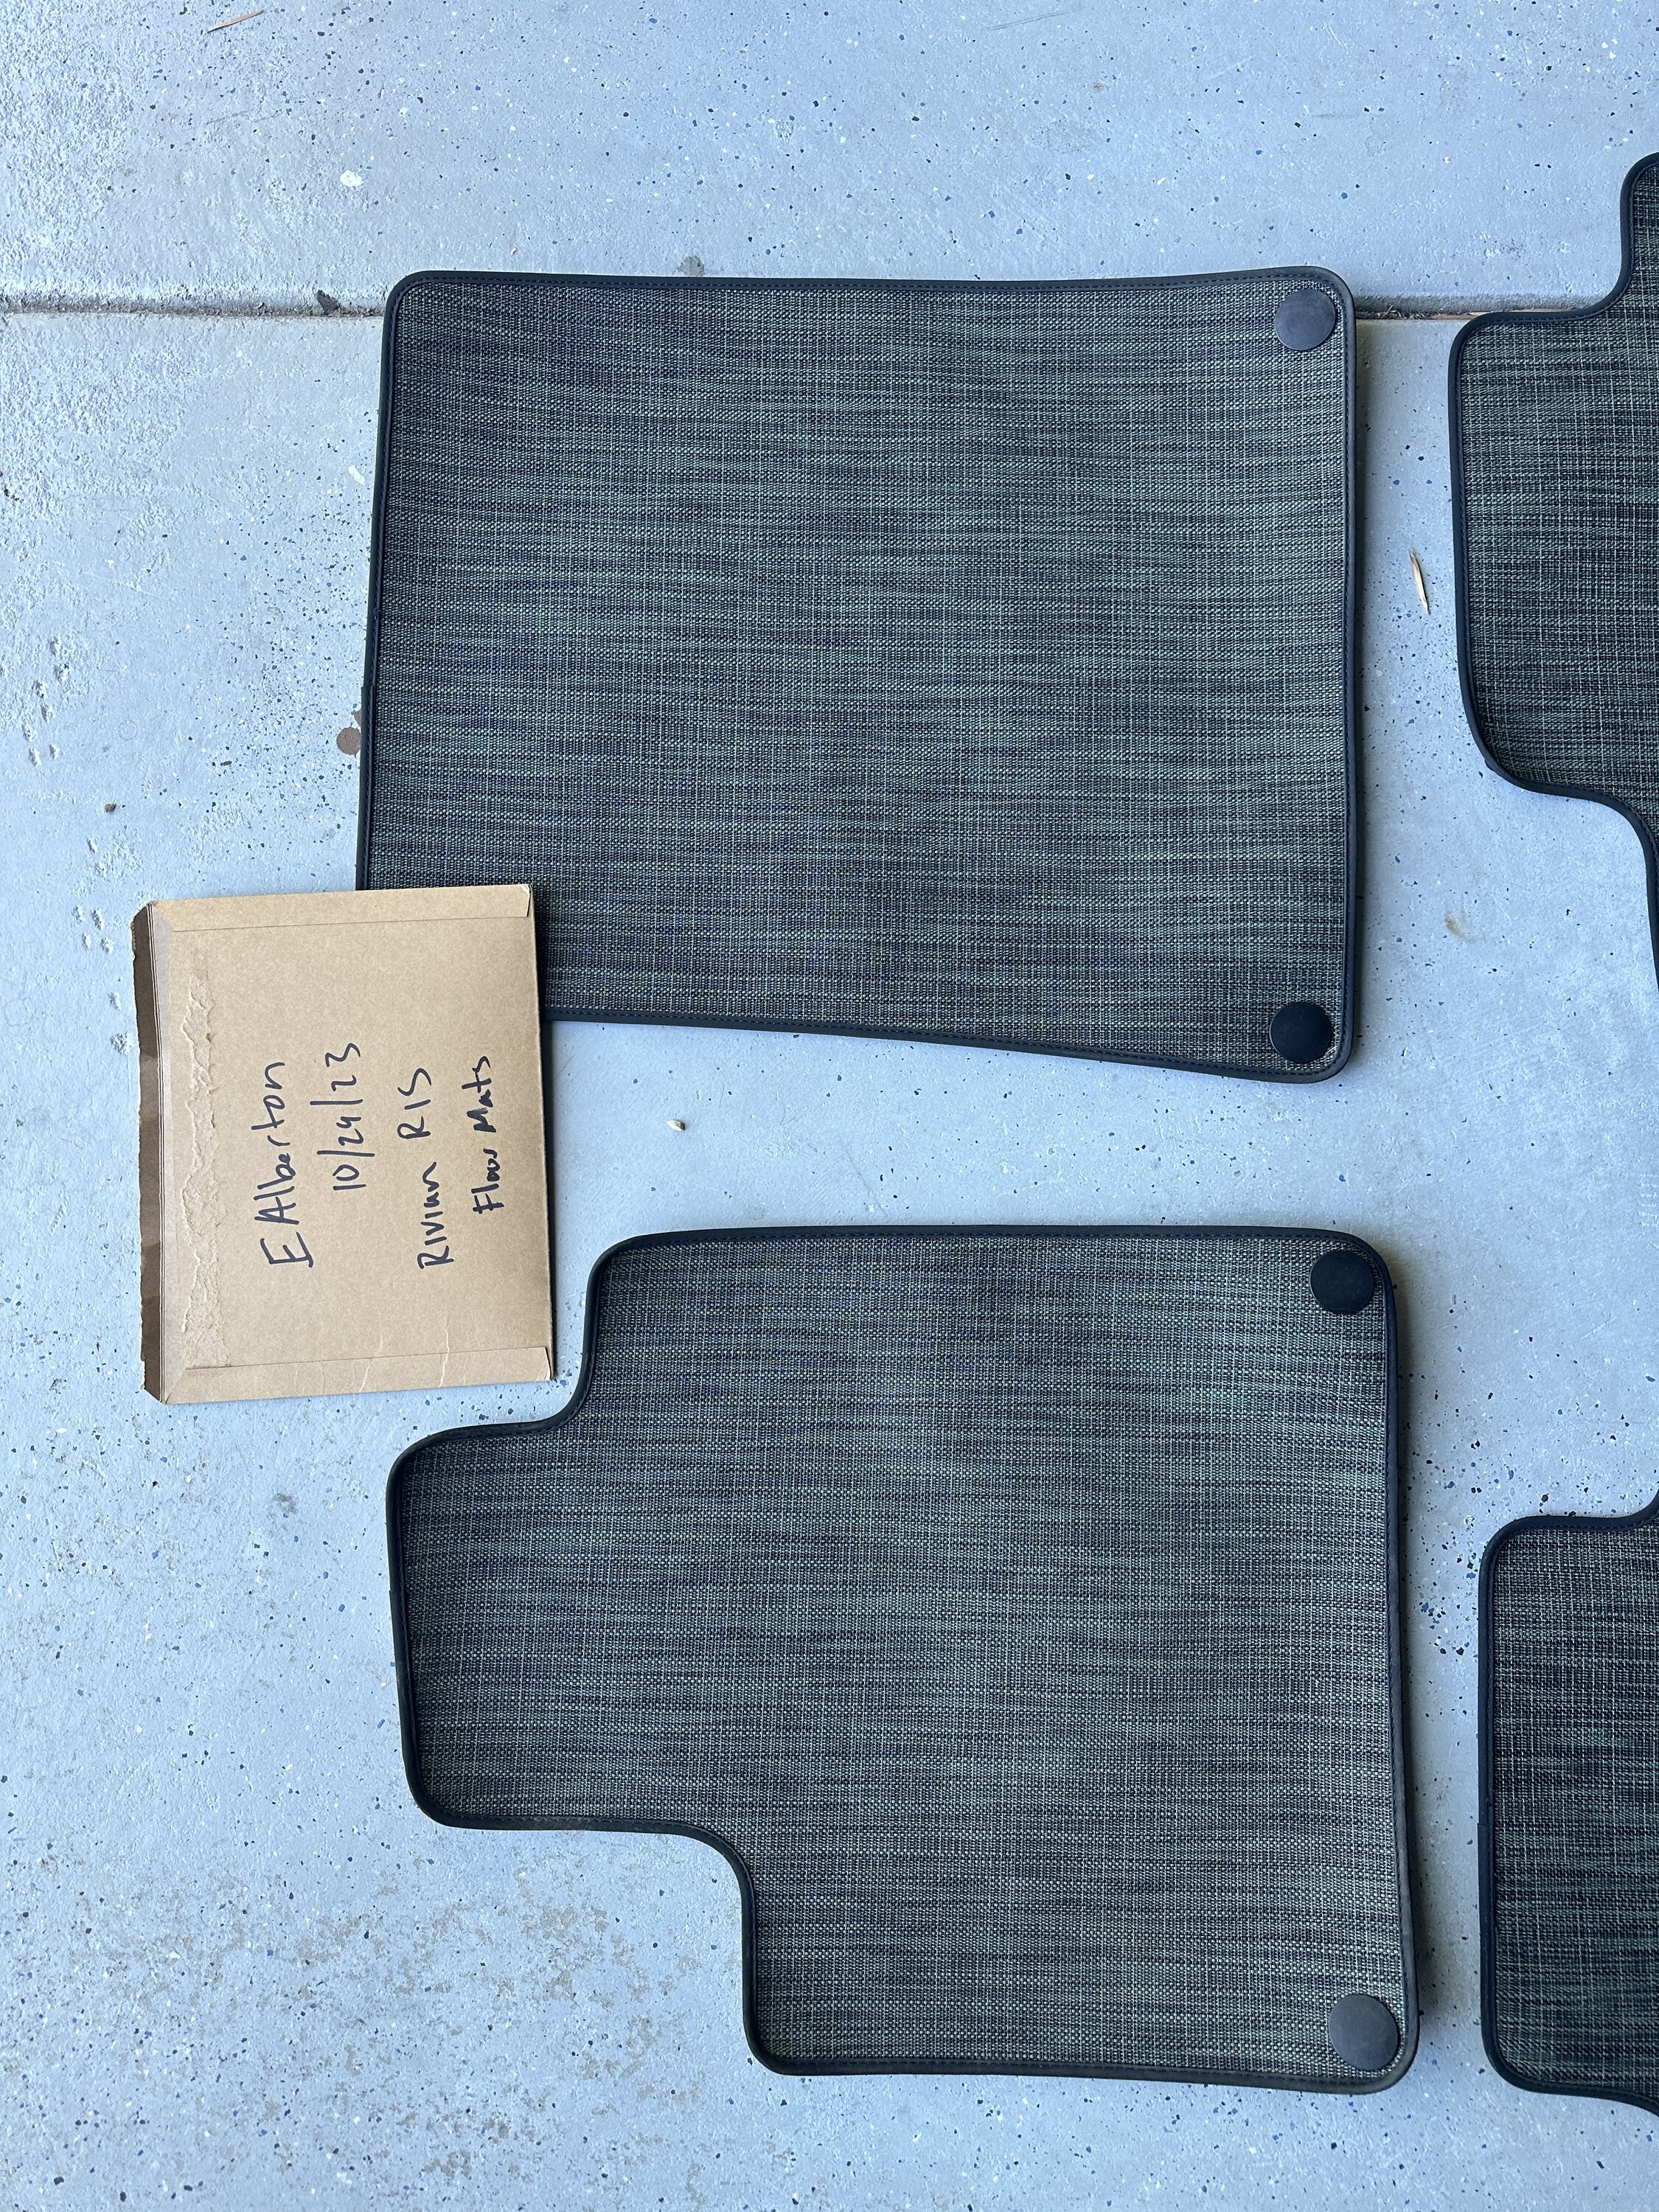 Rivian R1T R1S $50 R1S Floor Mats - New never used IMG_5772